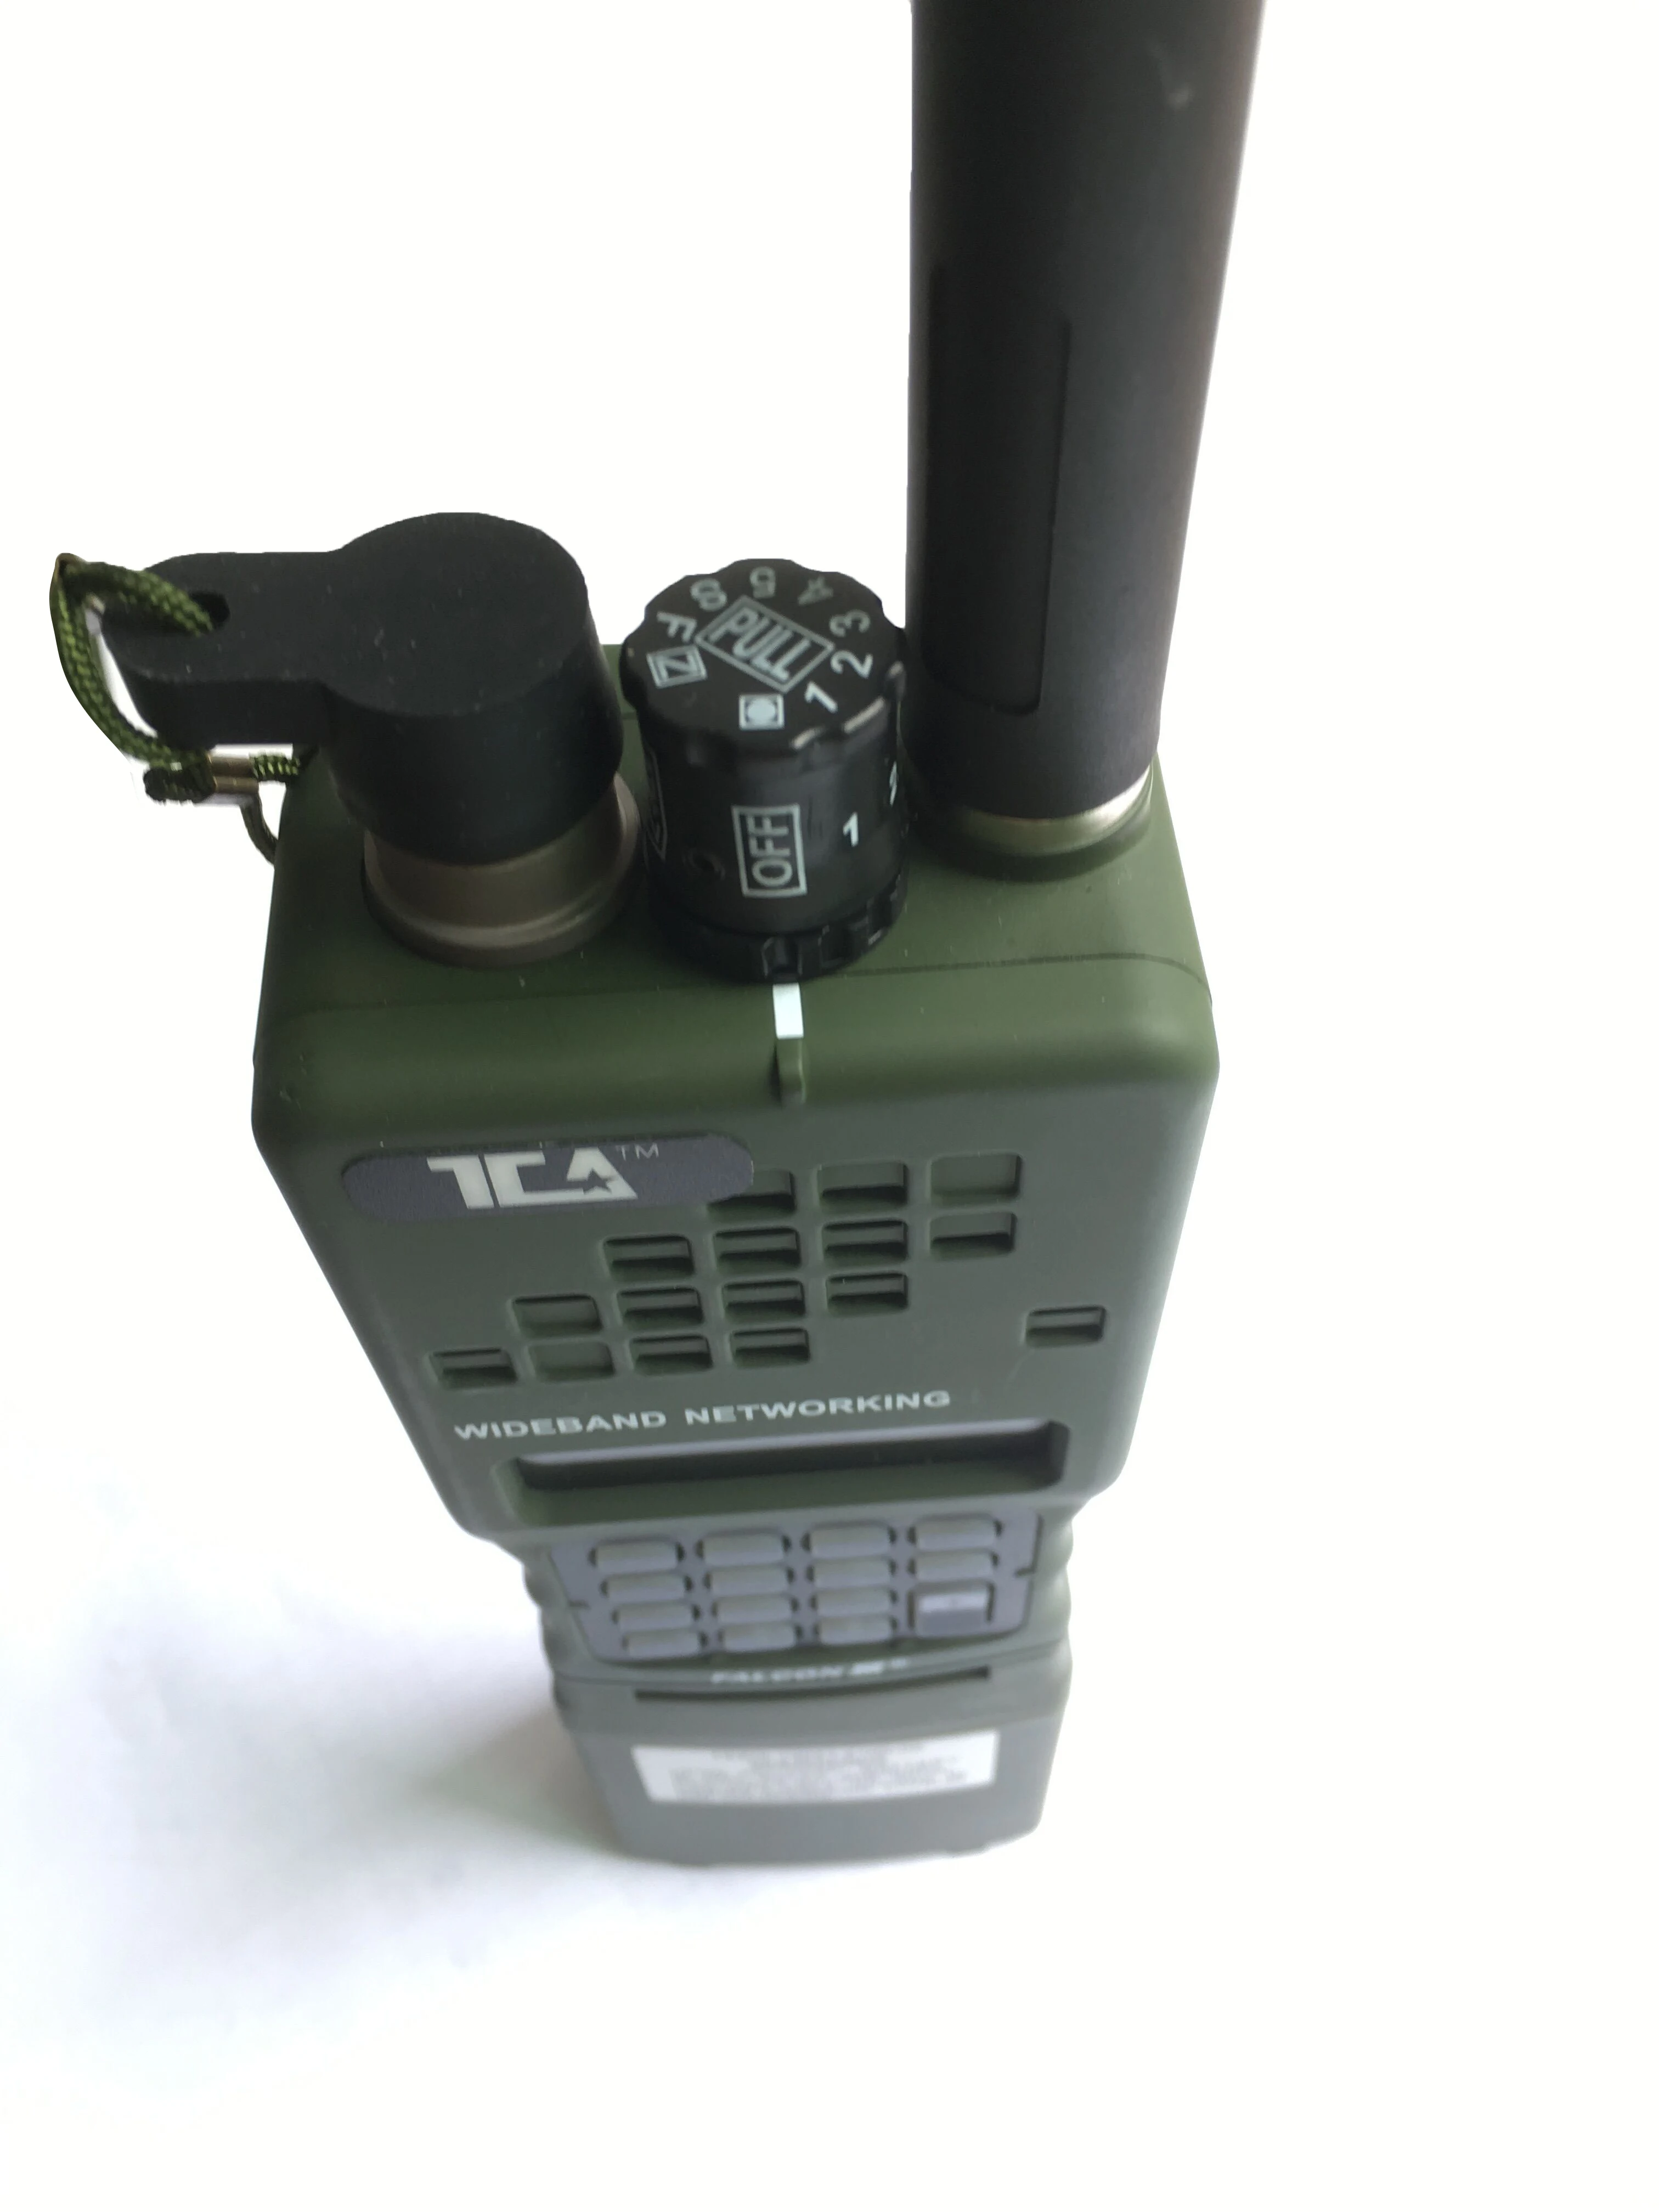 Military Dual Band Ham Portable Two Way Radio For Security With Army Police Equipment Walkie